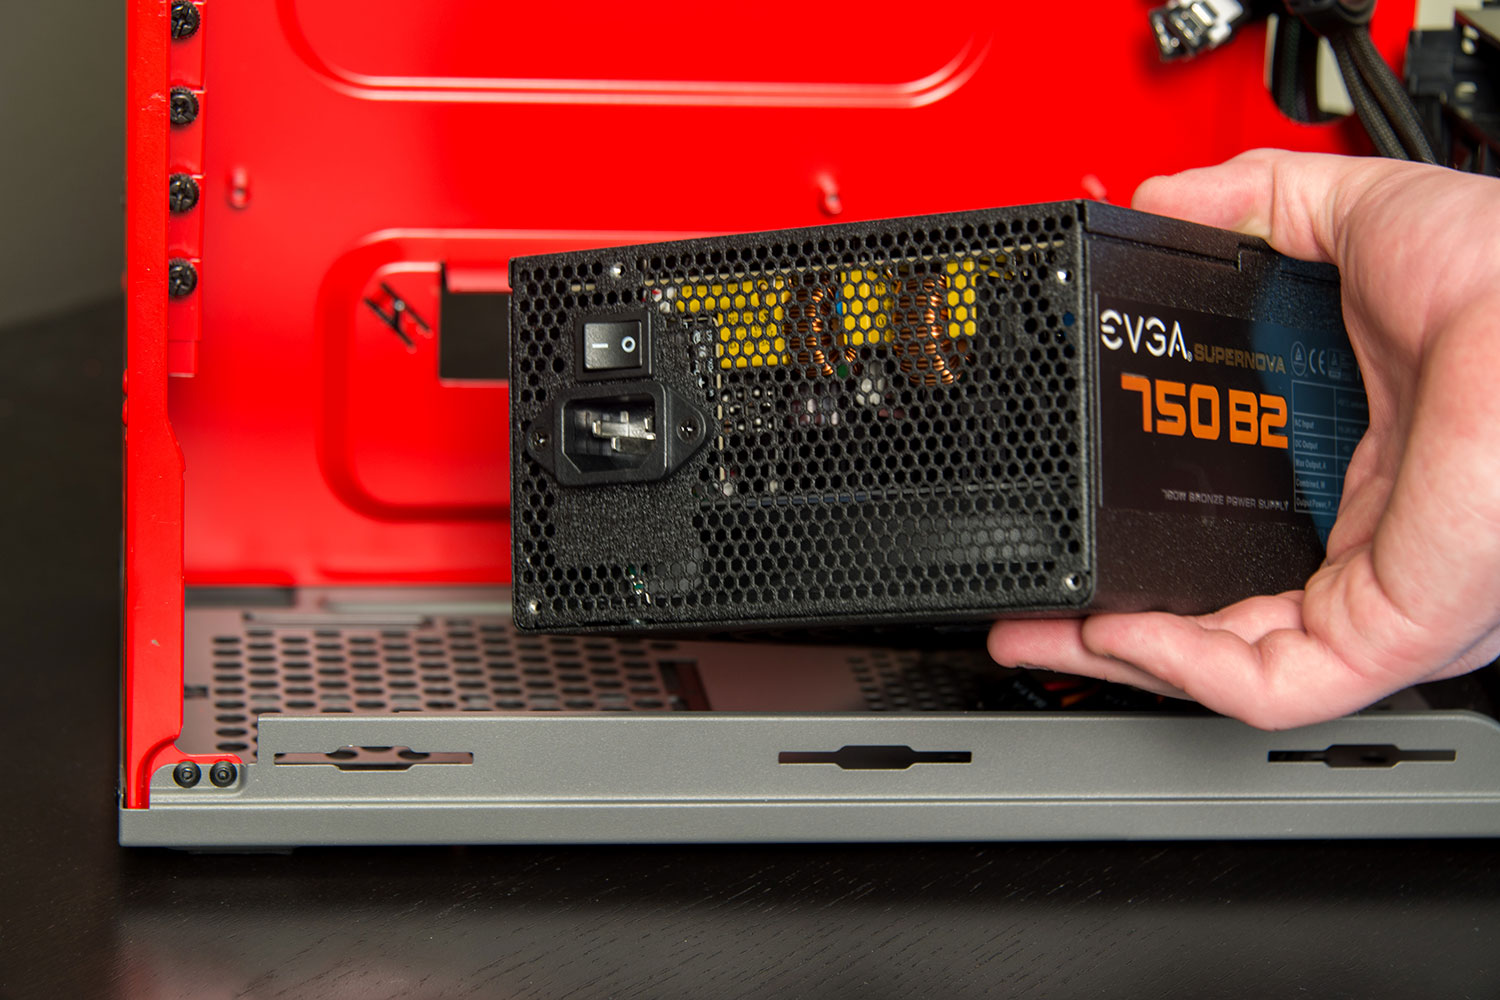 How to Troubleshoot a PC Power Supply - Newegg Business Smart Buyer